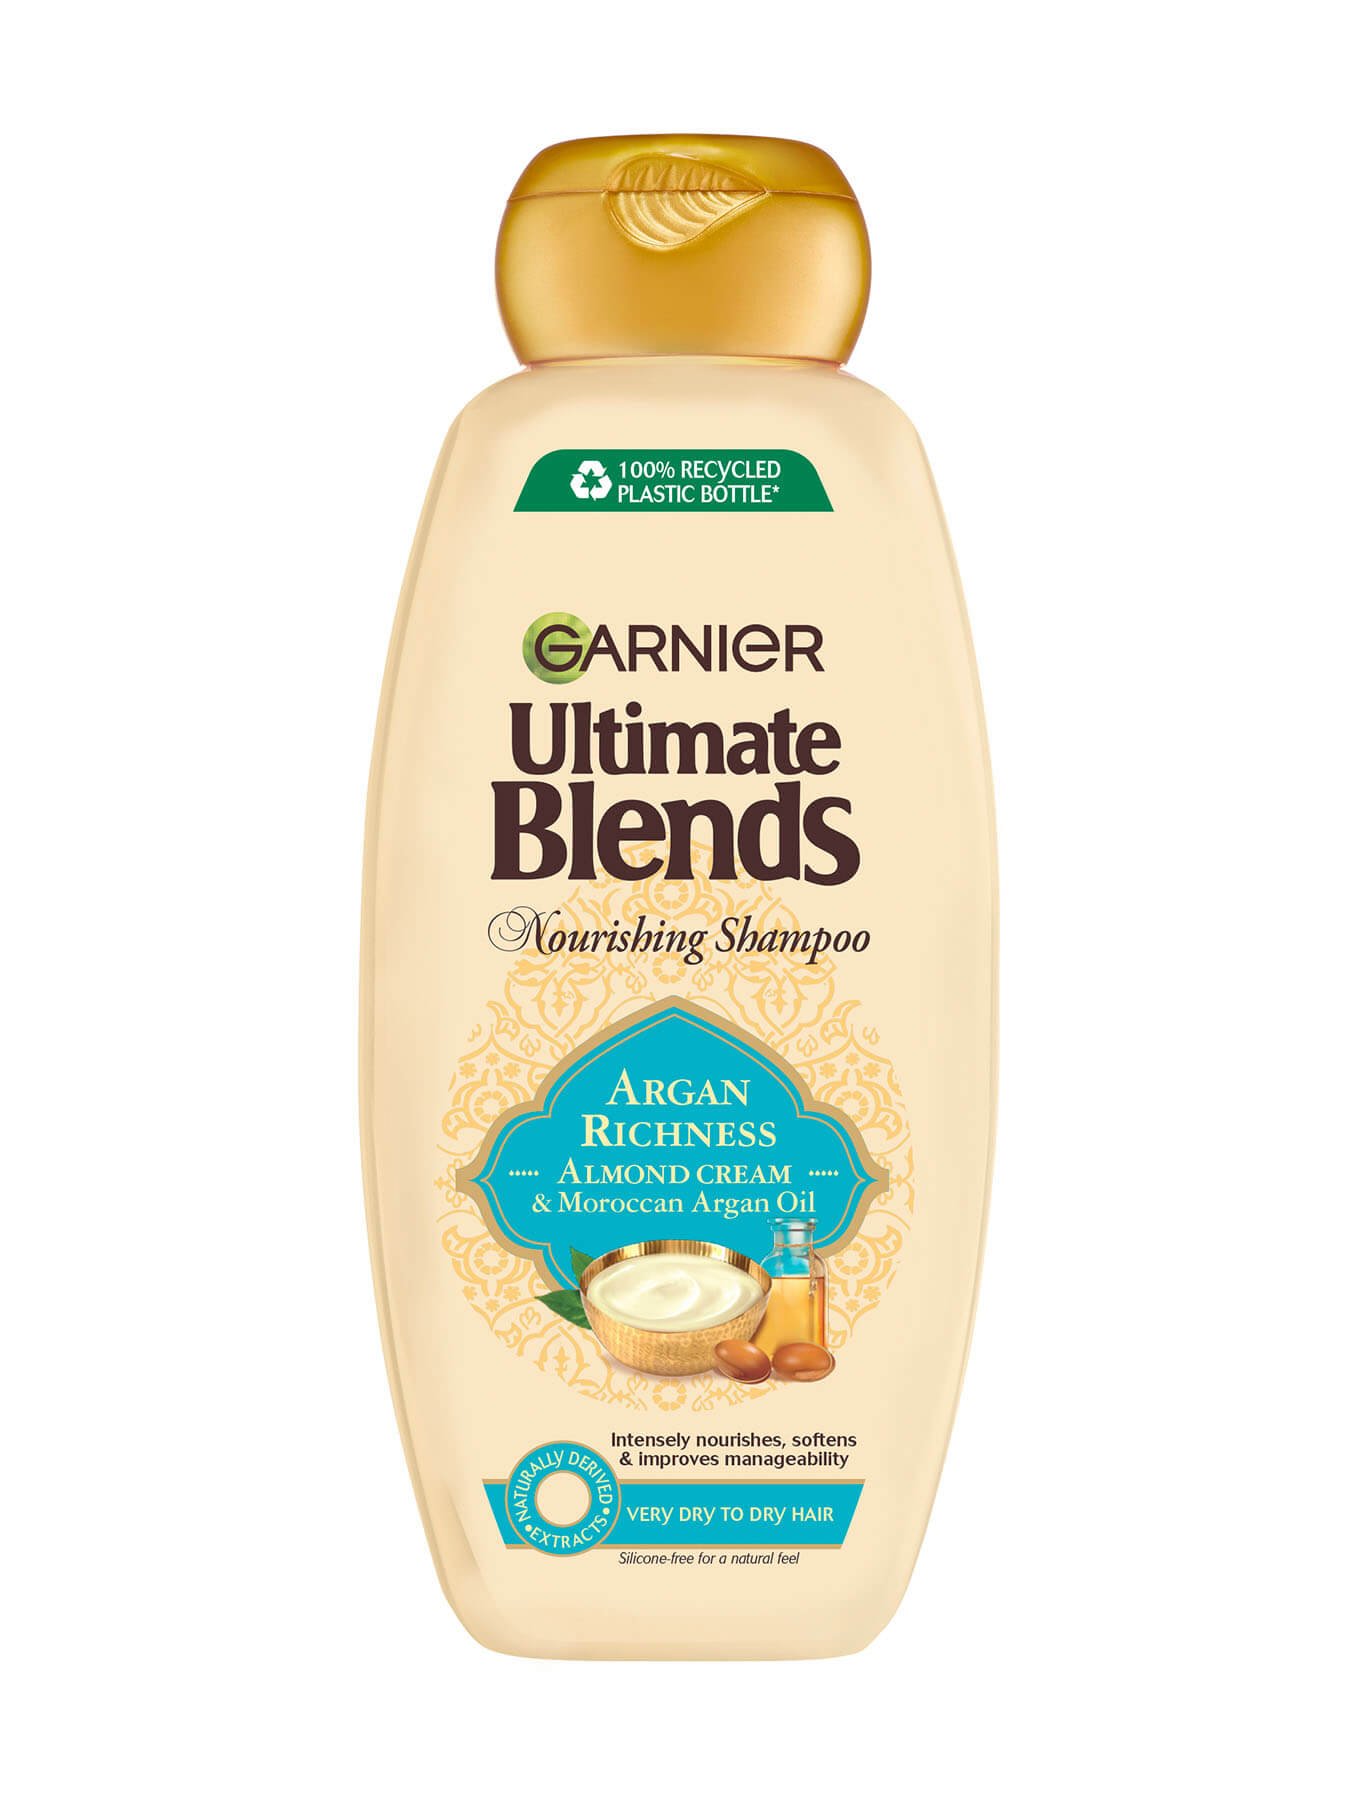 Ultimate Blends Argan Richness Shampoo Front of pack